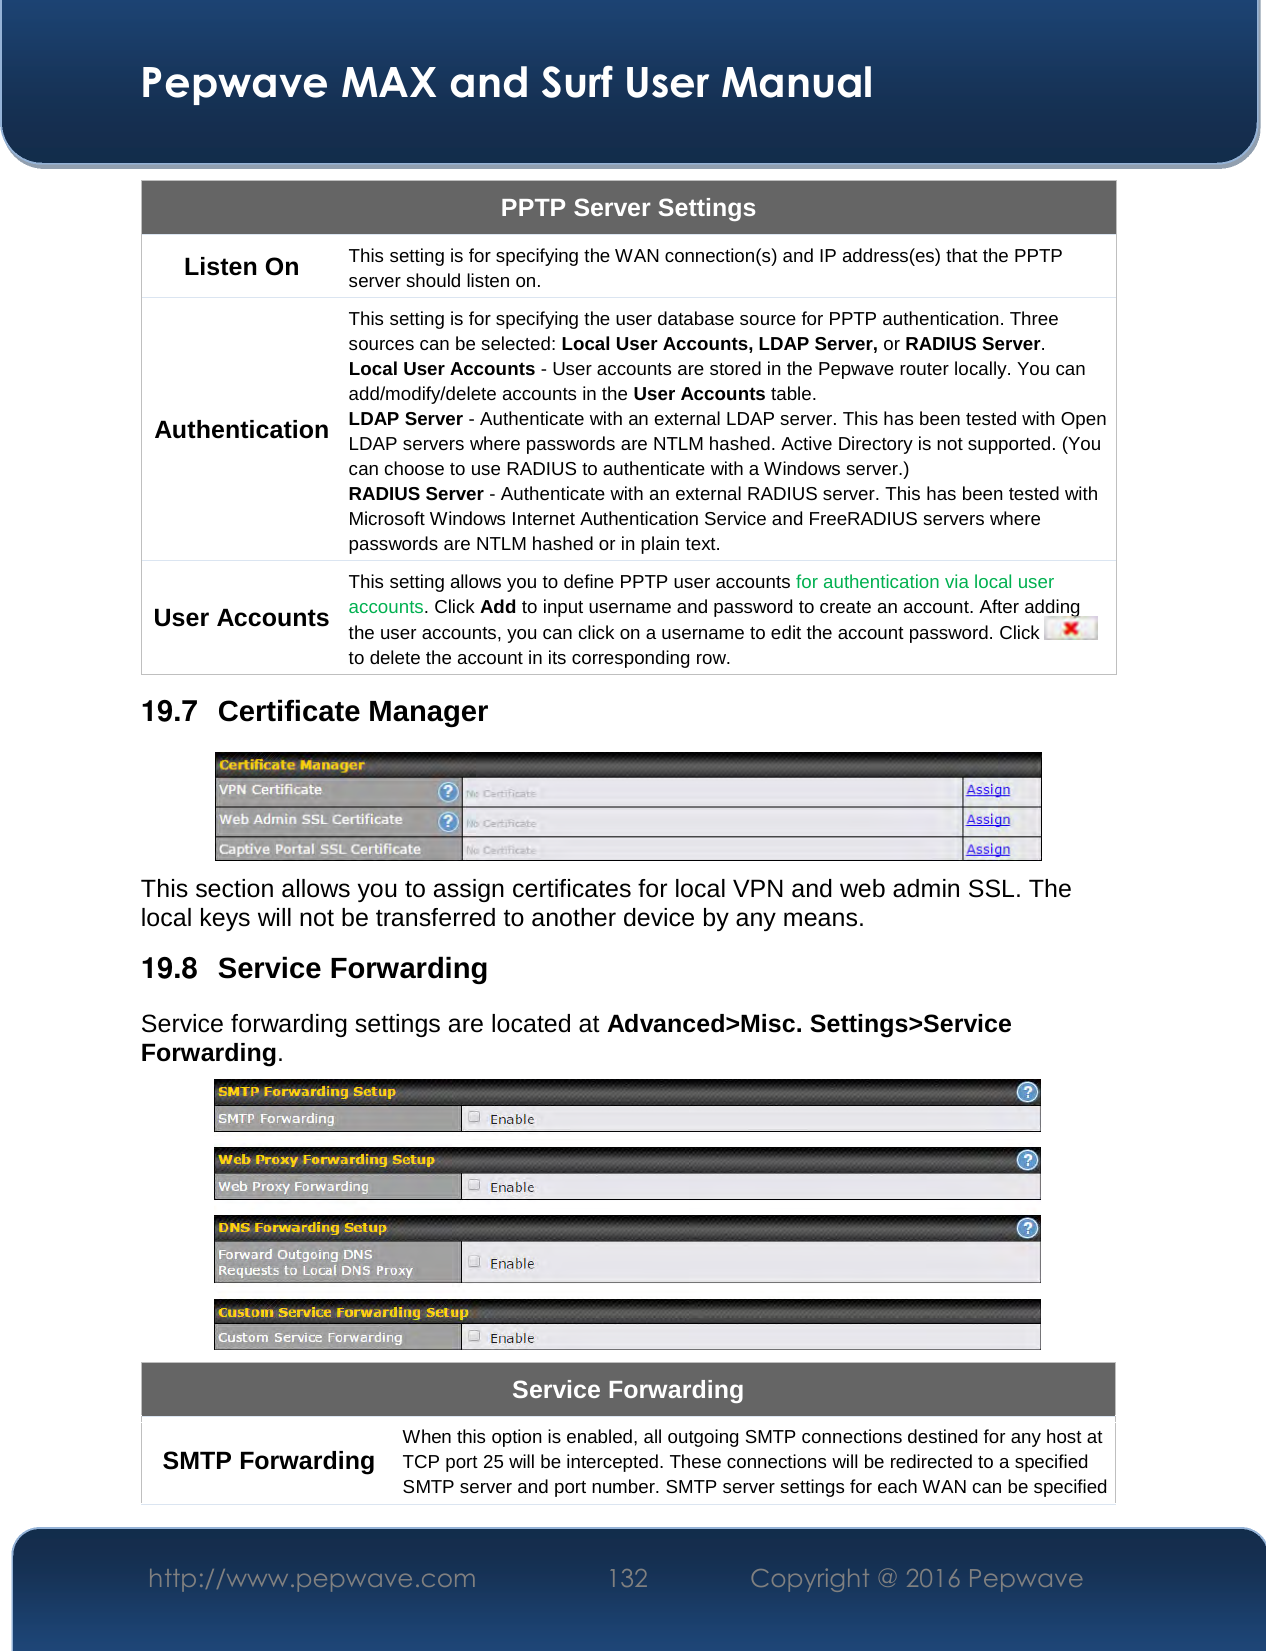  Pepwave MAX and Surf User Manual http://www.pepwave.com  132    Copyright @ 2016 Pepwave   PPTP Server Settings Listen On  This setting is for specifying the WAN connection(s) and IP address(es) that the PPTP server should listen on. Authentication This setting is for specifying the user database source for PPTP authentication. Three sources can be selected: Local User Accounts, LDAP Server, or RADIUS Server. Local User Accounts - User accounts are stored in the Pepwave router locally. You can add/modify/delete accounts in the User Accounts table. LDAP Server - Authenticate with an external LDAP server. This has been tested with Open LDAP servers where passwords are NTLM hashed. Active Directory is not supported. (You can choose to use RADIUS to authenticate with a Windows server.) RADIUS Server - Authenticate with an external RADIUS server. This has been tested with Microsoft Windows Internet Authentication Service and FreeRADIUS servers where passwords are NTLM hashed or in plain text. User Accounts This setting allows you to define PPTP user accounts for authentication via local user accounts. Click Add to input username and password to create an account. After adding the user accounts, you can click on a username to edit the account password. Click   to delete the account in its corresponding row. 19.7  Certificate Manager  This section allows you to assign certificates for local VPN and web admin SSL. The local keys will not be transferred to another device by any means. 19.8  Service Forwarding Service forwarding settings are located at Advanced&gt;Misc. Settings&gt;Service Forwarding.  Service Forwarding SMTP Forwarding When this option is enabled, all outgoing SMTP connections destined for any host at TCP port 25 will be intercepted. These connections will be redirected to a specified SMTP server and port number. SMTP server settings for each WAN can be specified 